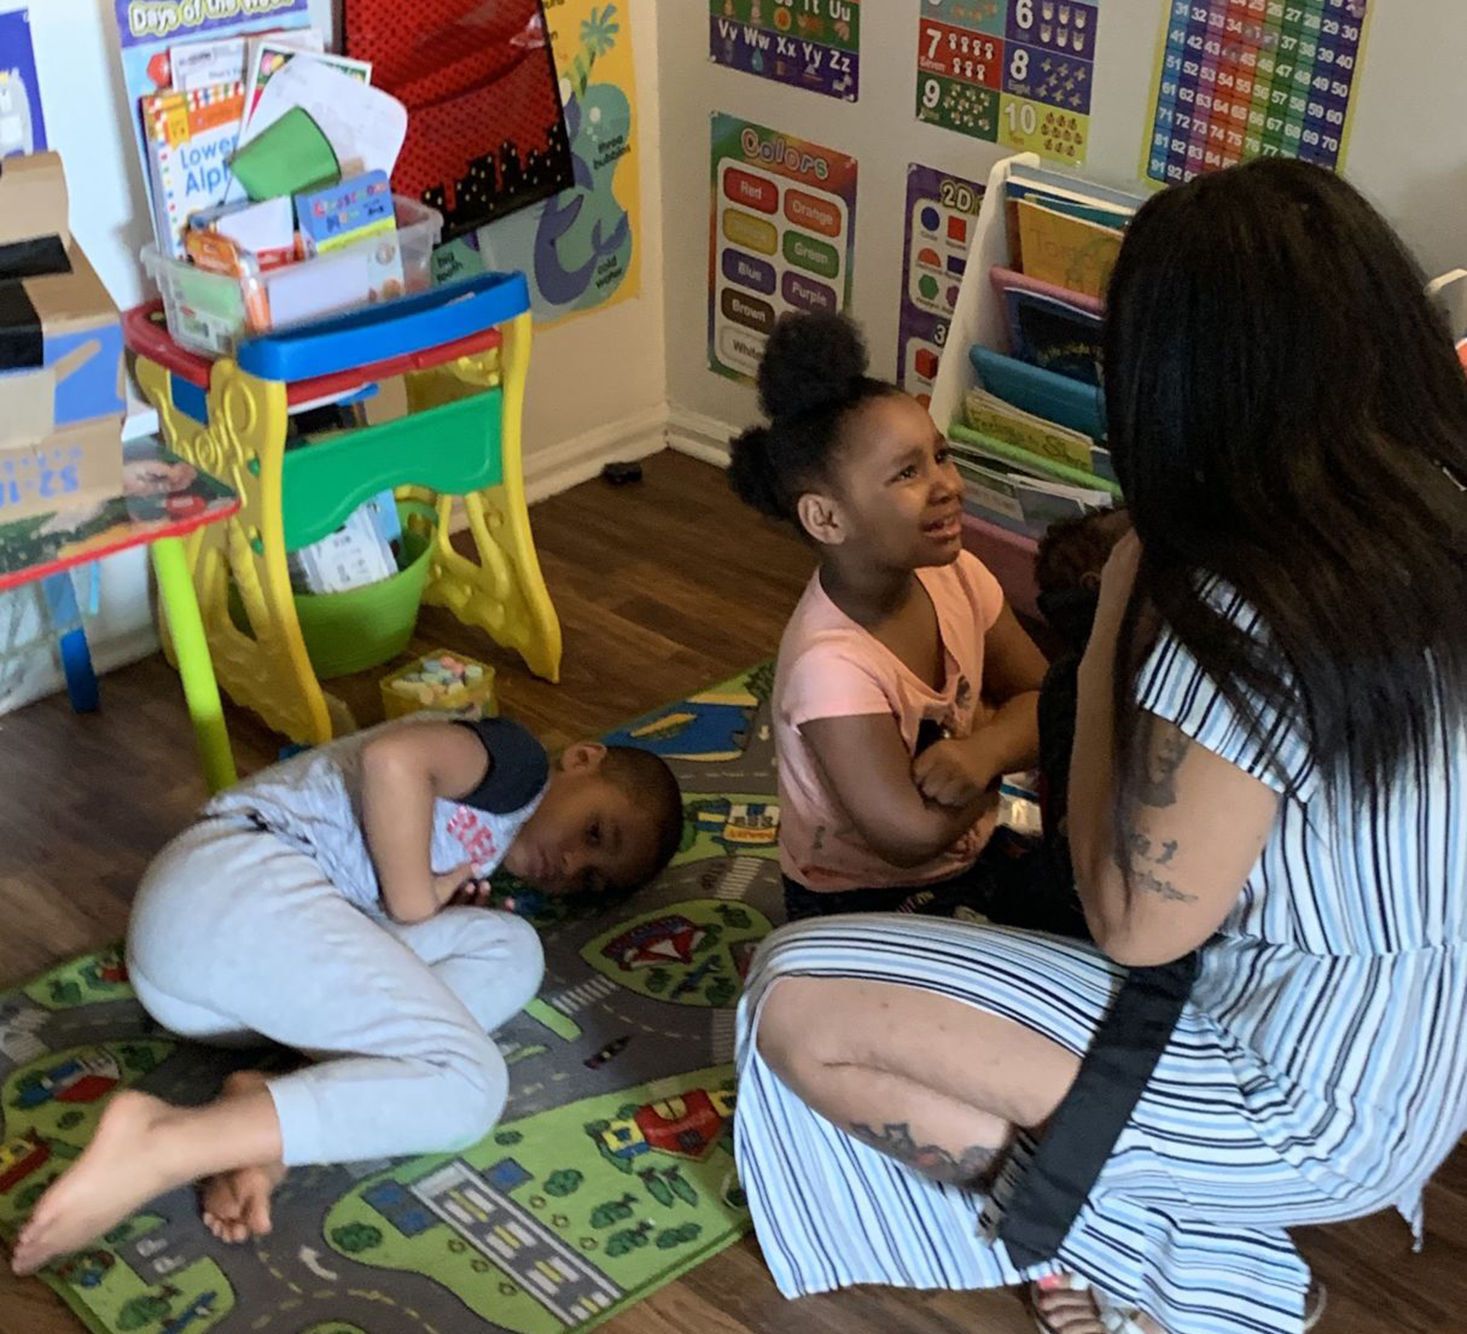 Tyra Johnson struggled to get her young children through the first day of school at home. Image by Aisha Sultan / Post-Dispatch. United States, 2020.